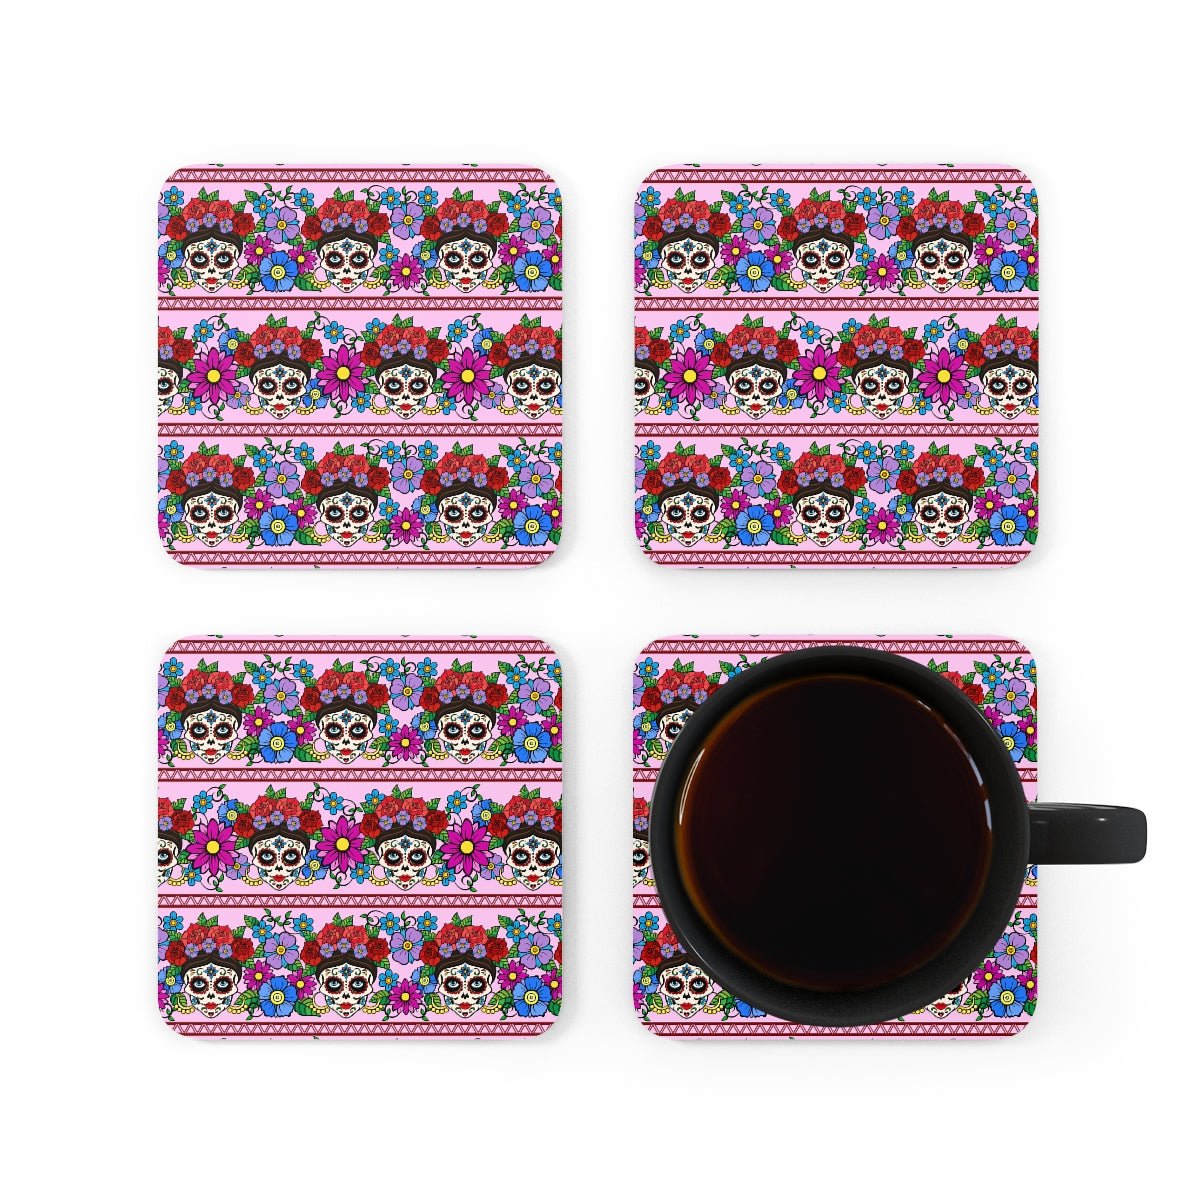 Flowers and Sugar Skulls Corkwood Coaster Set - Puffin Lime